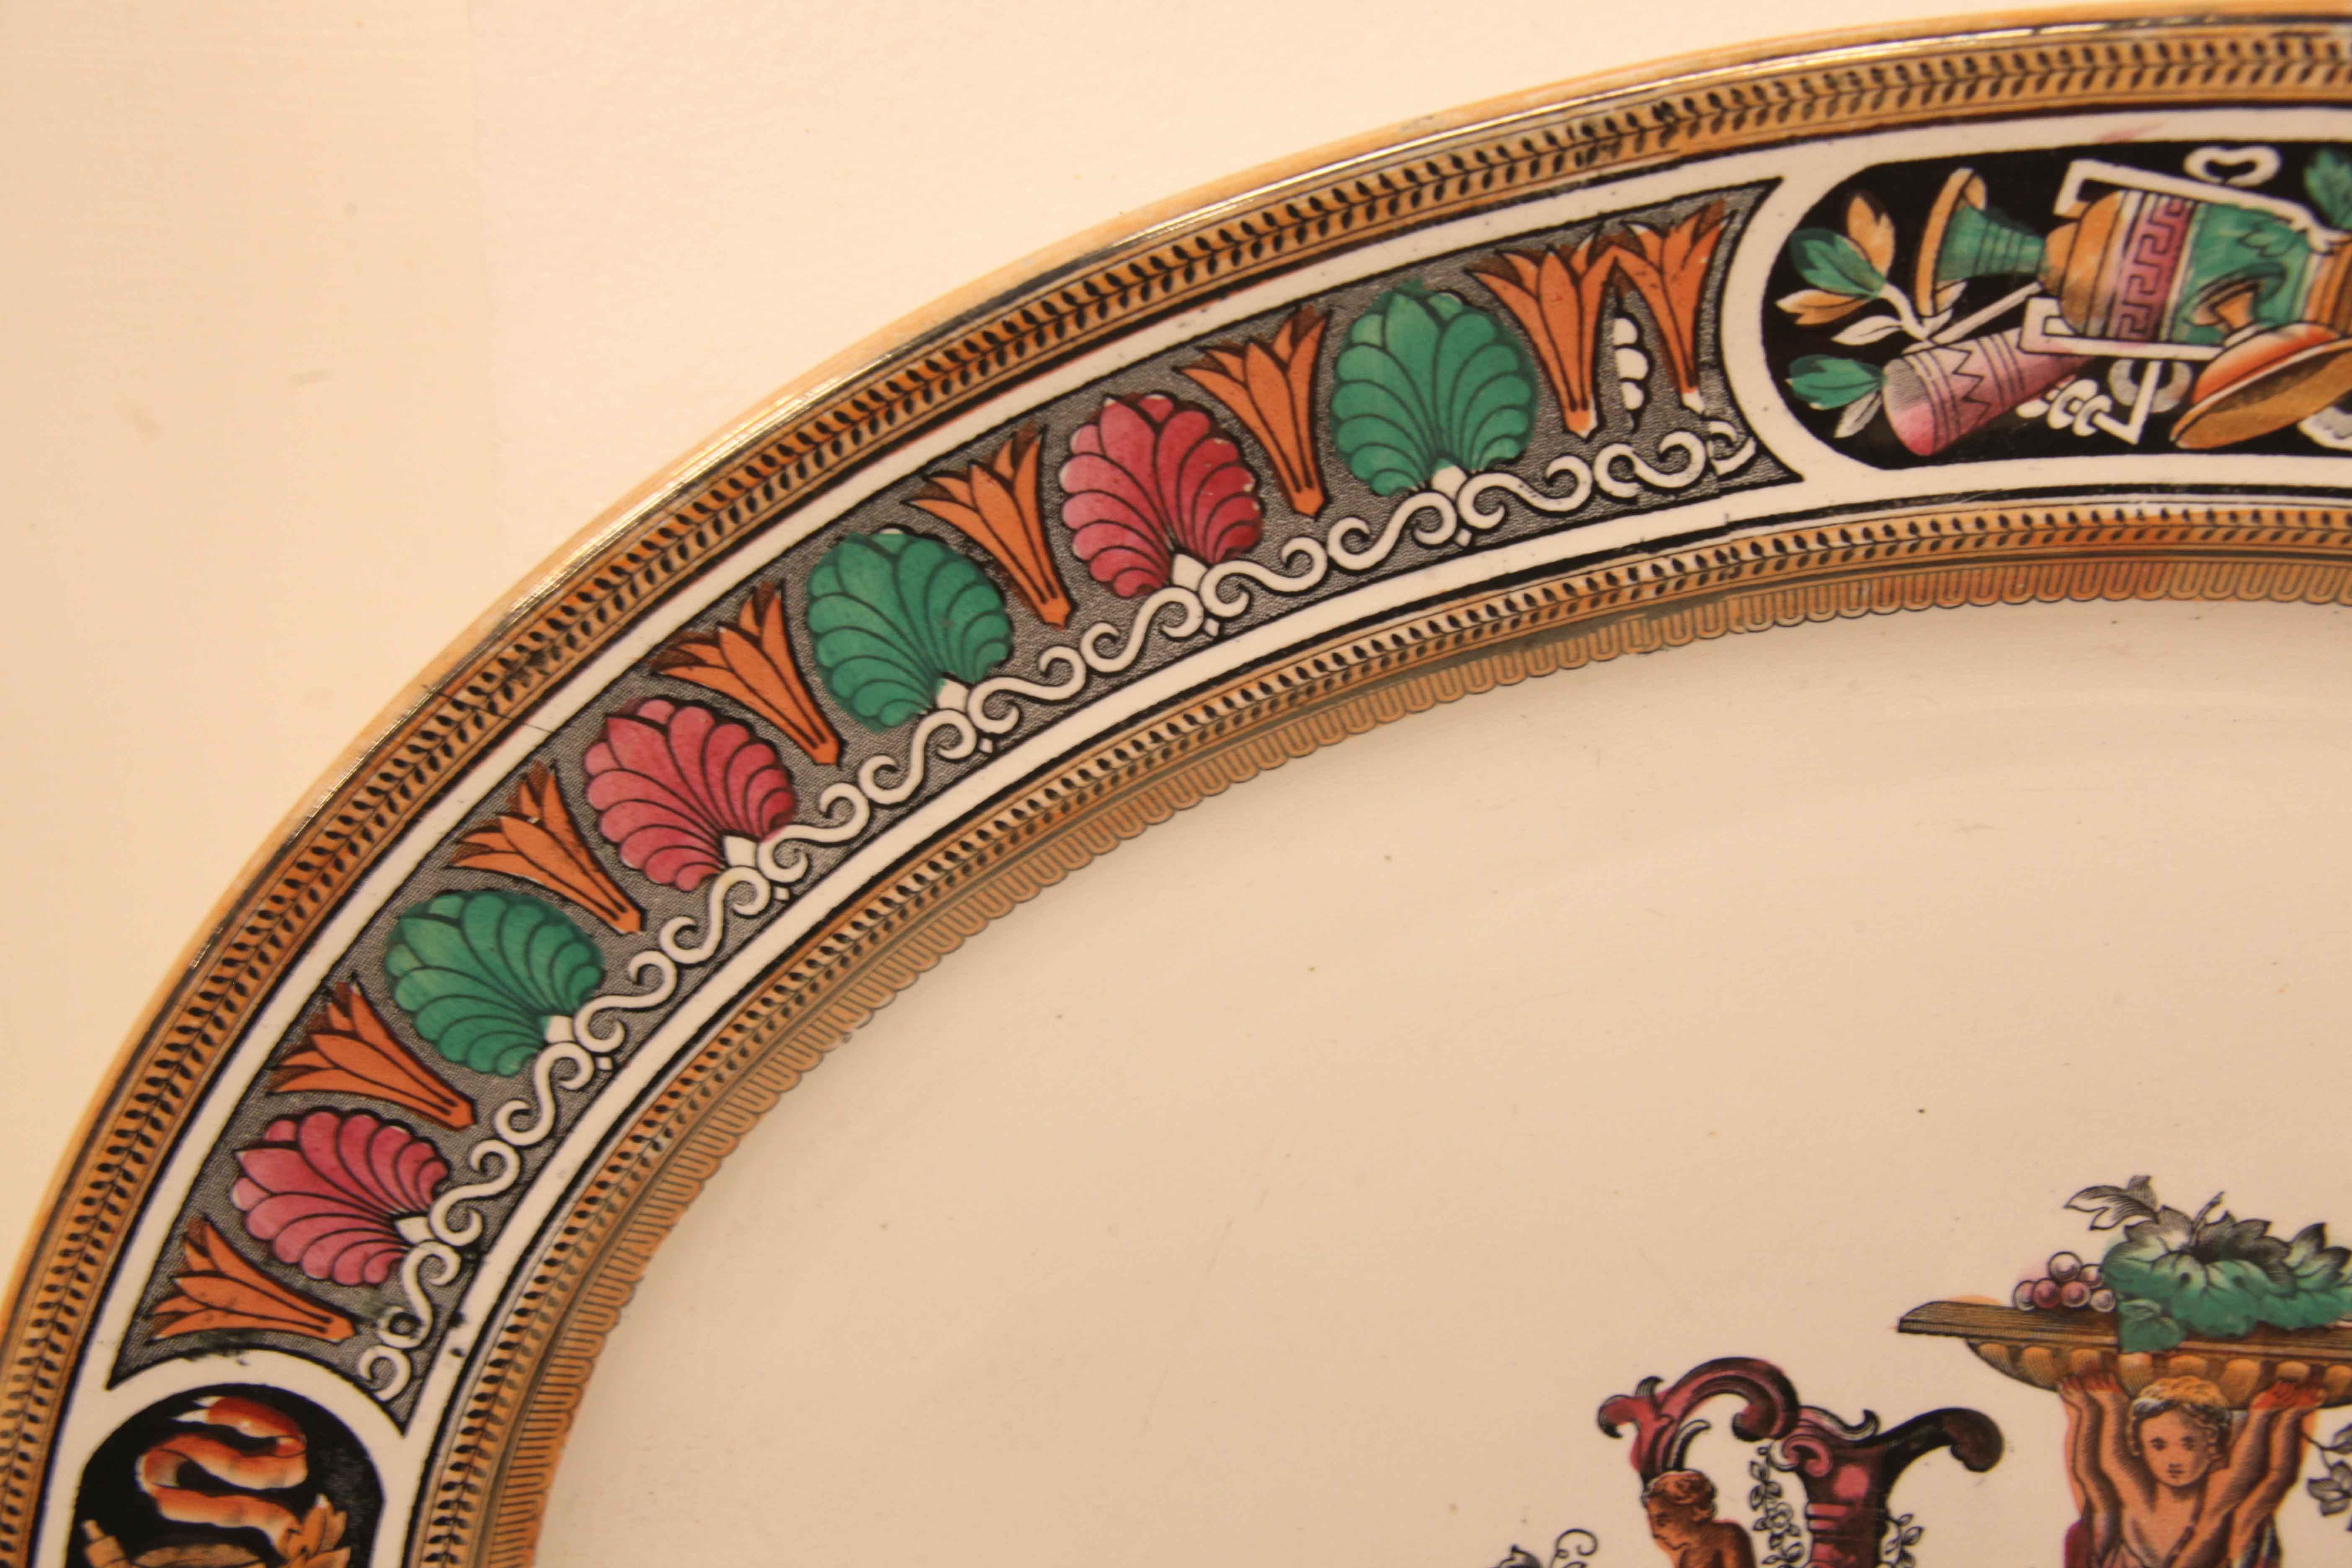 Large English ironstone platter, the outer rim and inner border have a black leaf pattern on a salmon colored background, the main border has alternating motifs in rose, teal and orange interrupted with four cartouches featuring an oriental vase and